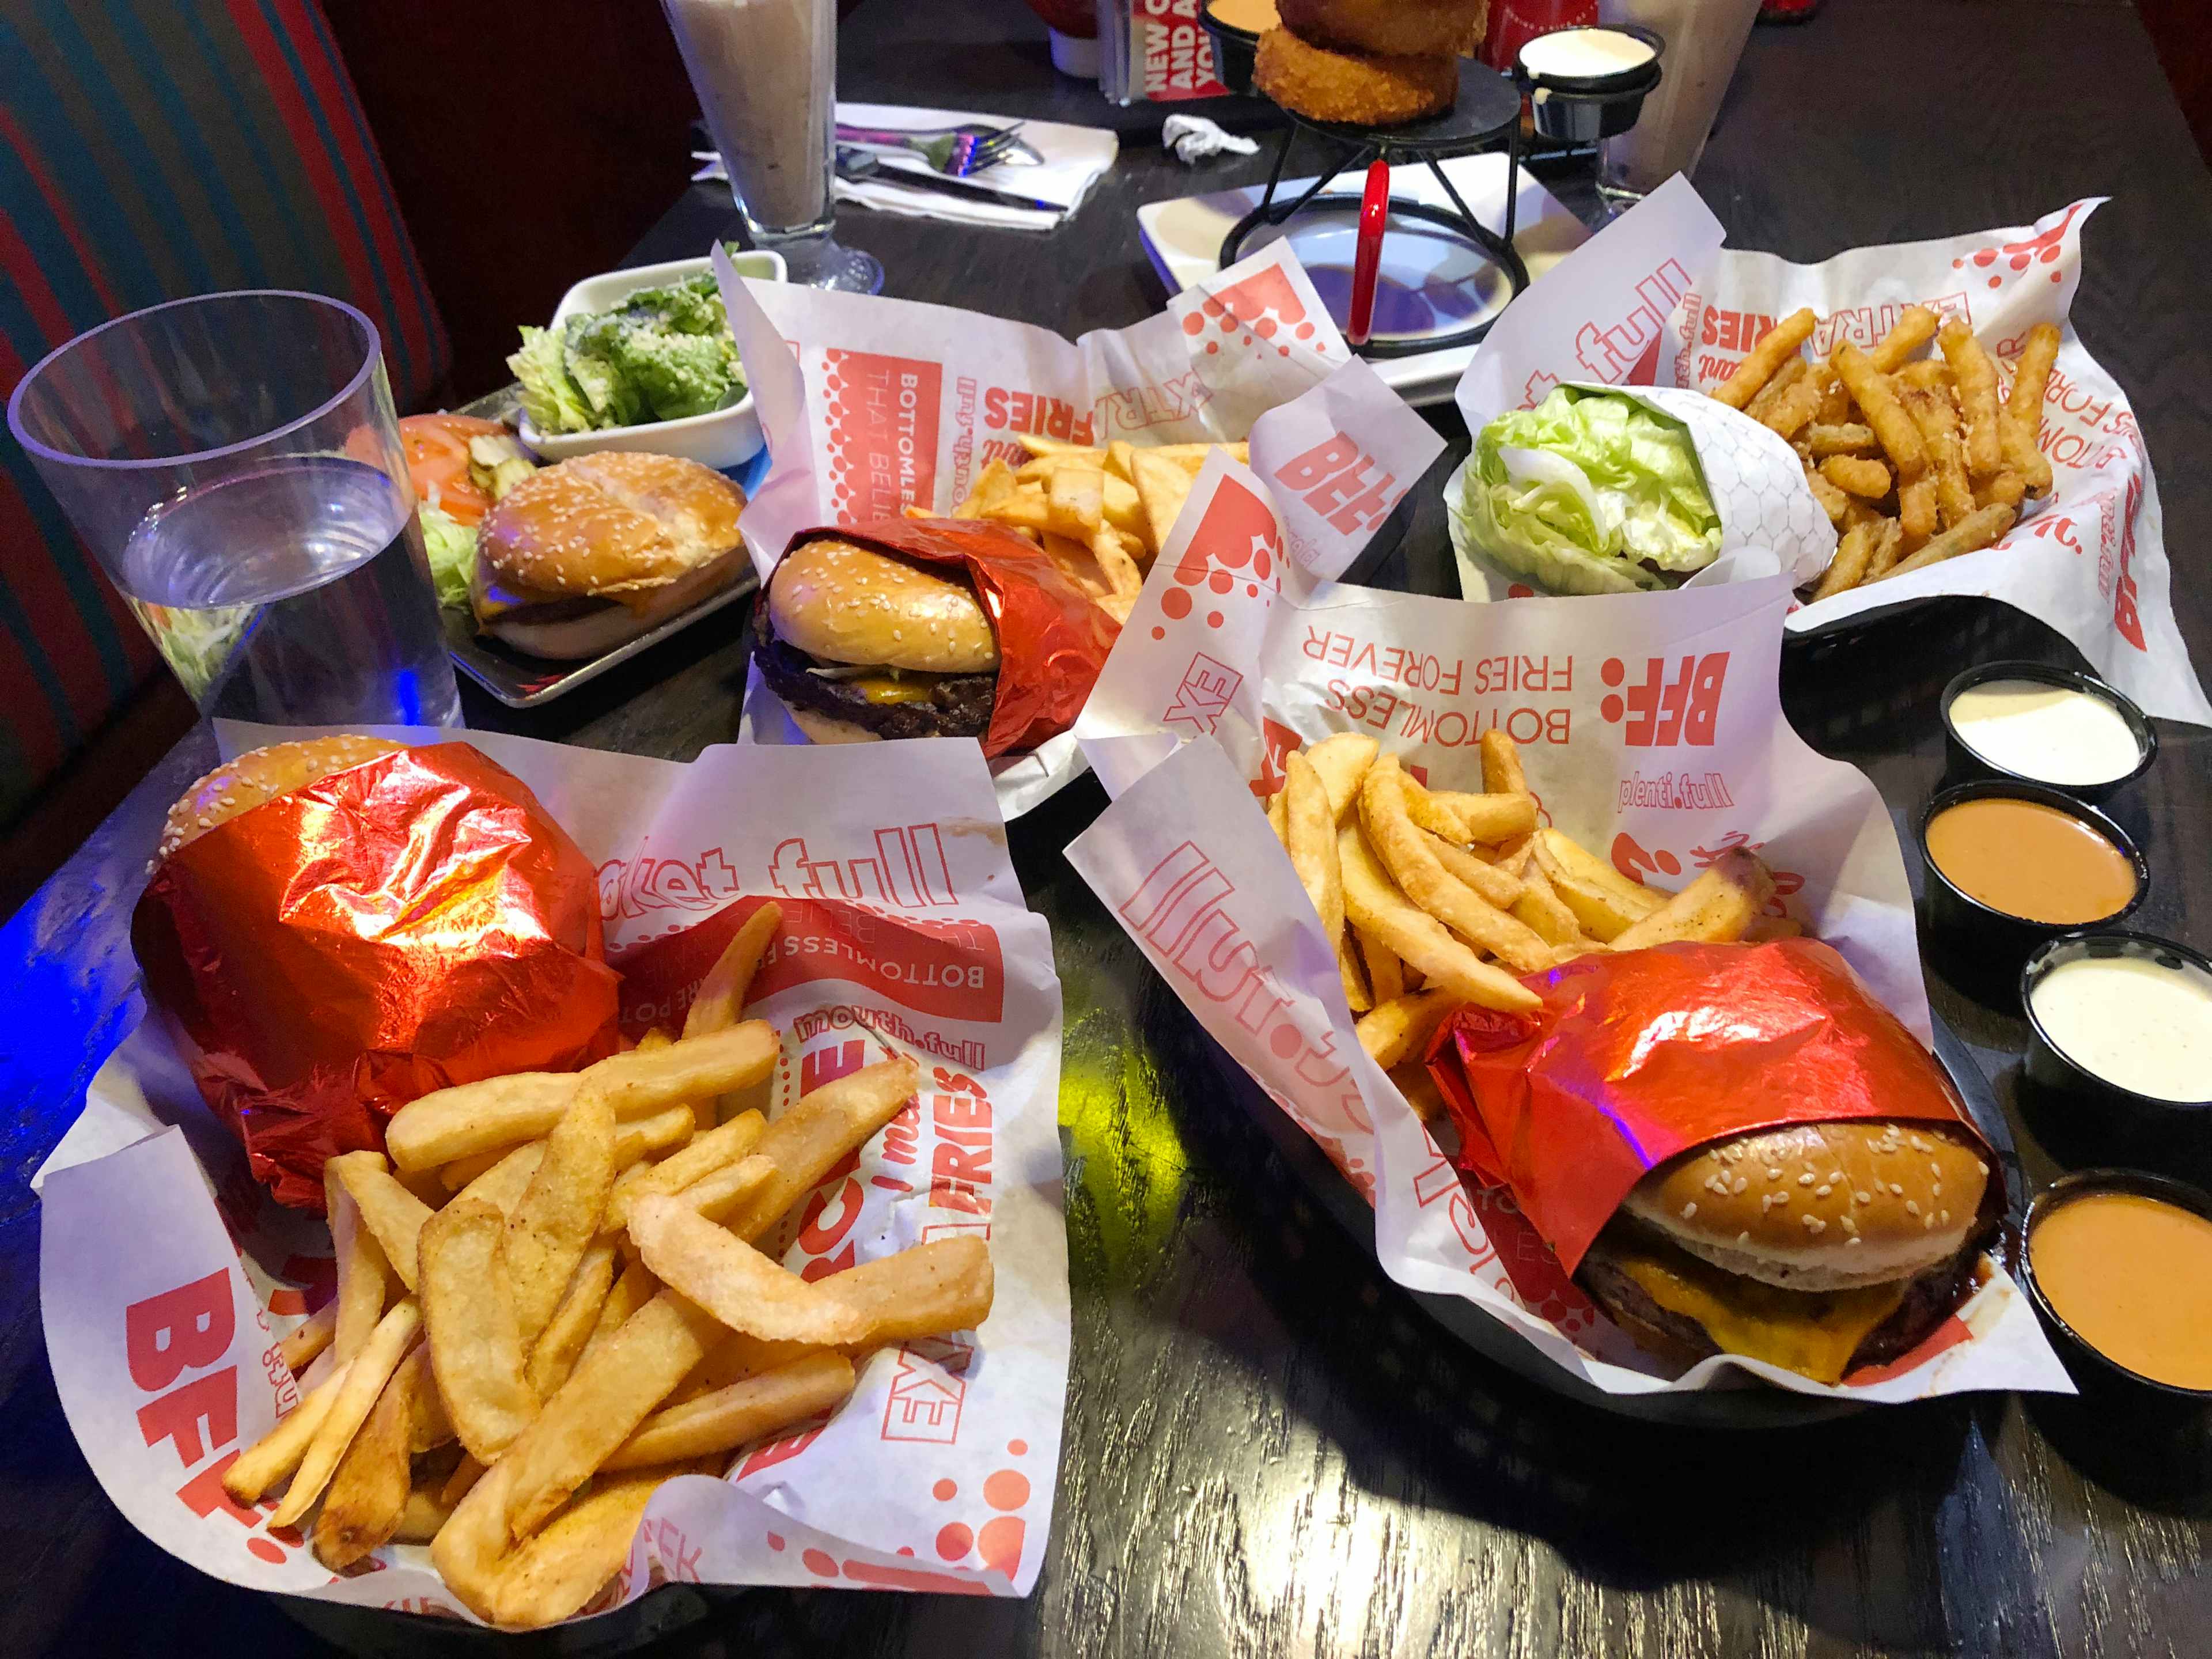 A table at Red Robin with multiple plates of food, including burgers, fries, broccoli, a tower of onion rings, a milkshake, and several ...